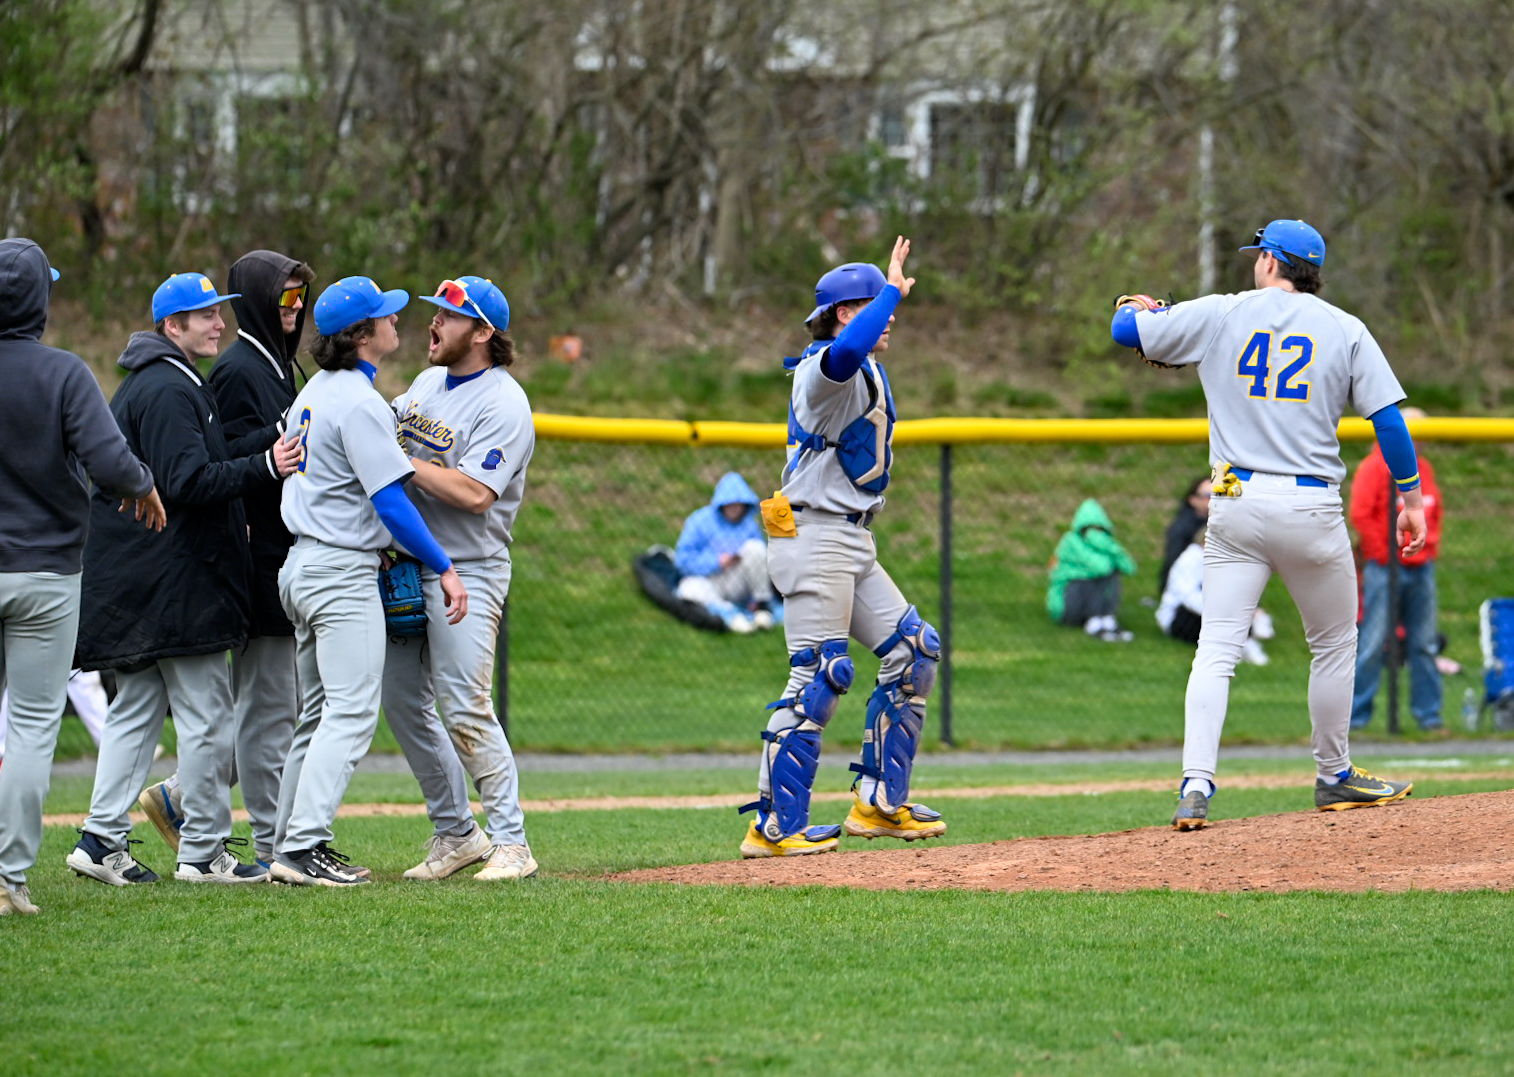 Lancers Claim Extra Innings Victory in Split with Bears